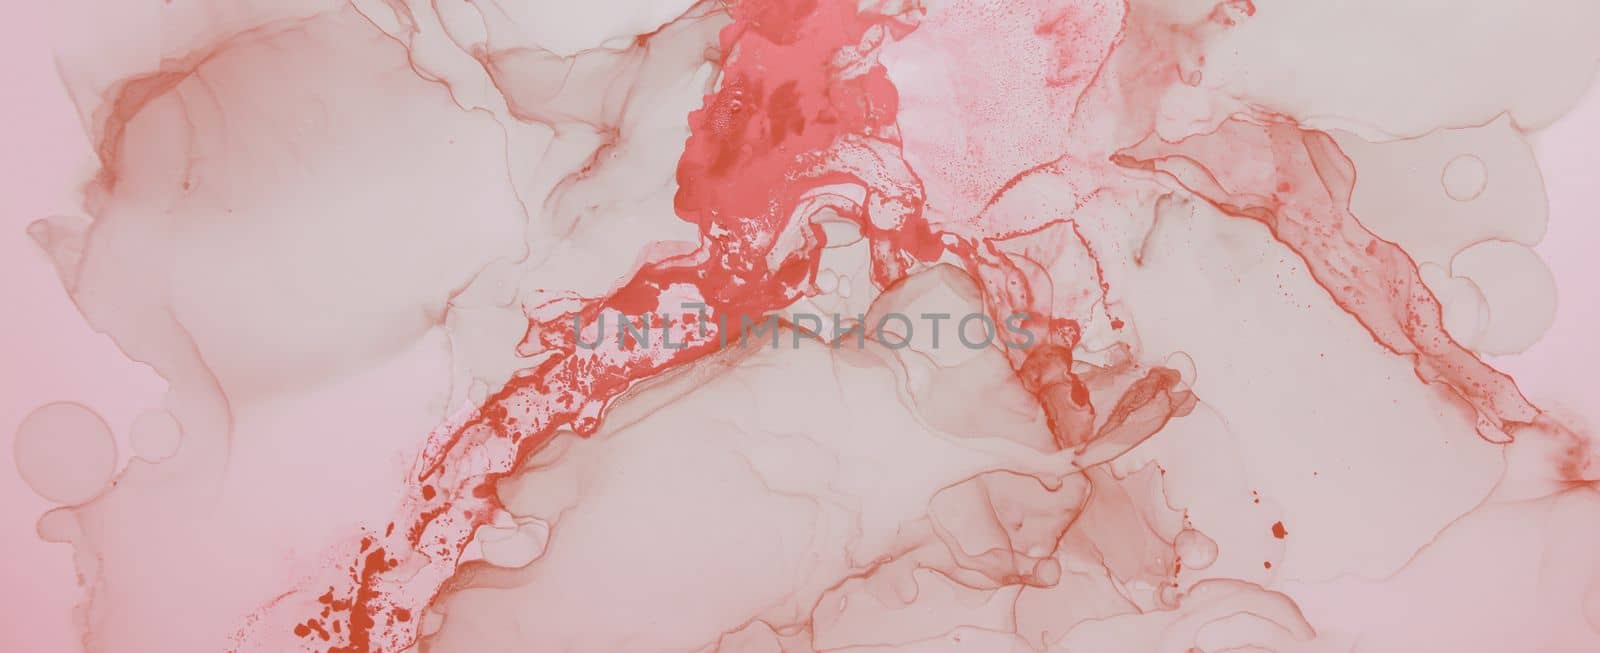 Delicate Liquid Marble. Abstract Mix. Ink Color Effect. Acrylic Splash. Rose Fluid Paint. Alcohol Luxury Marble. Gold Background. Art Creative Texture. Sophisticated Pink Marble.